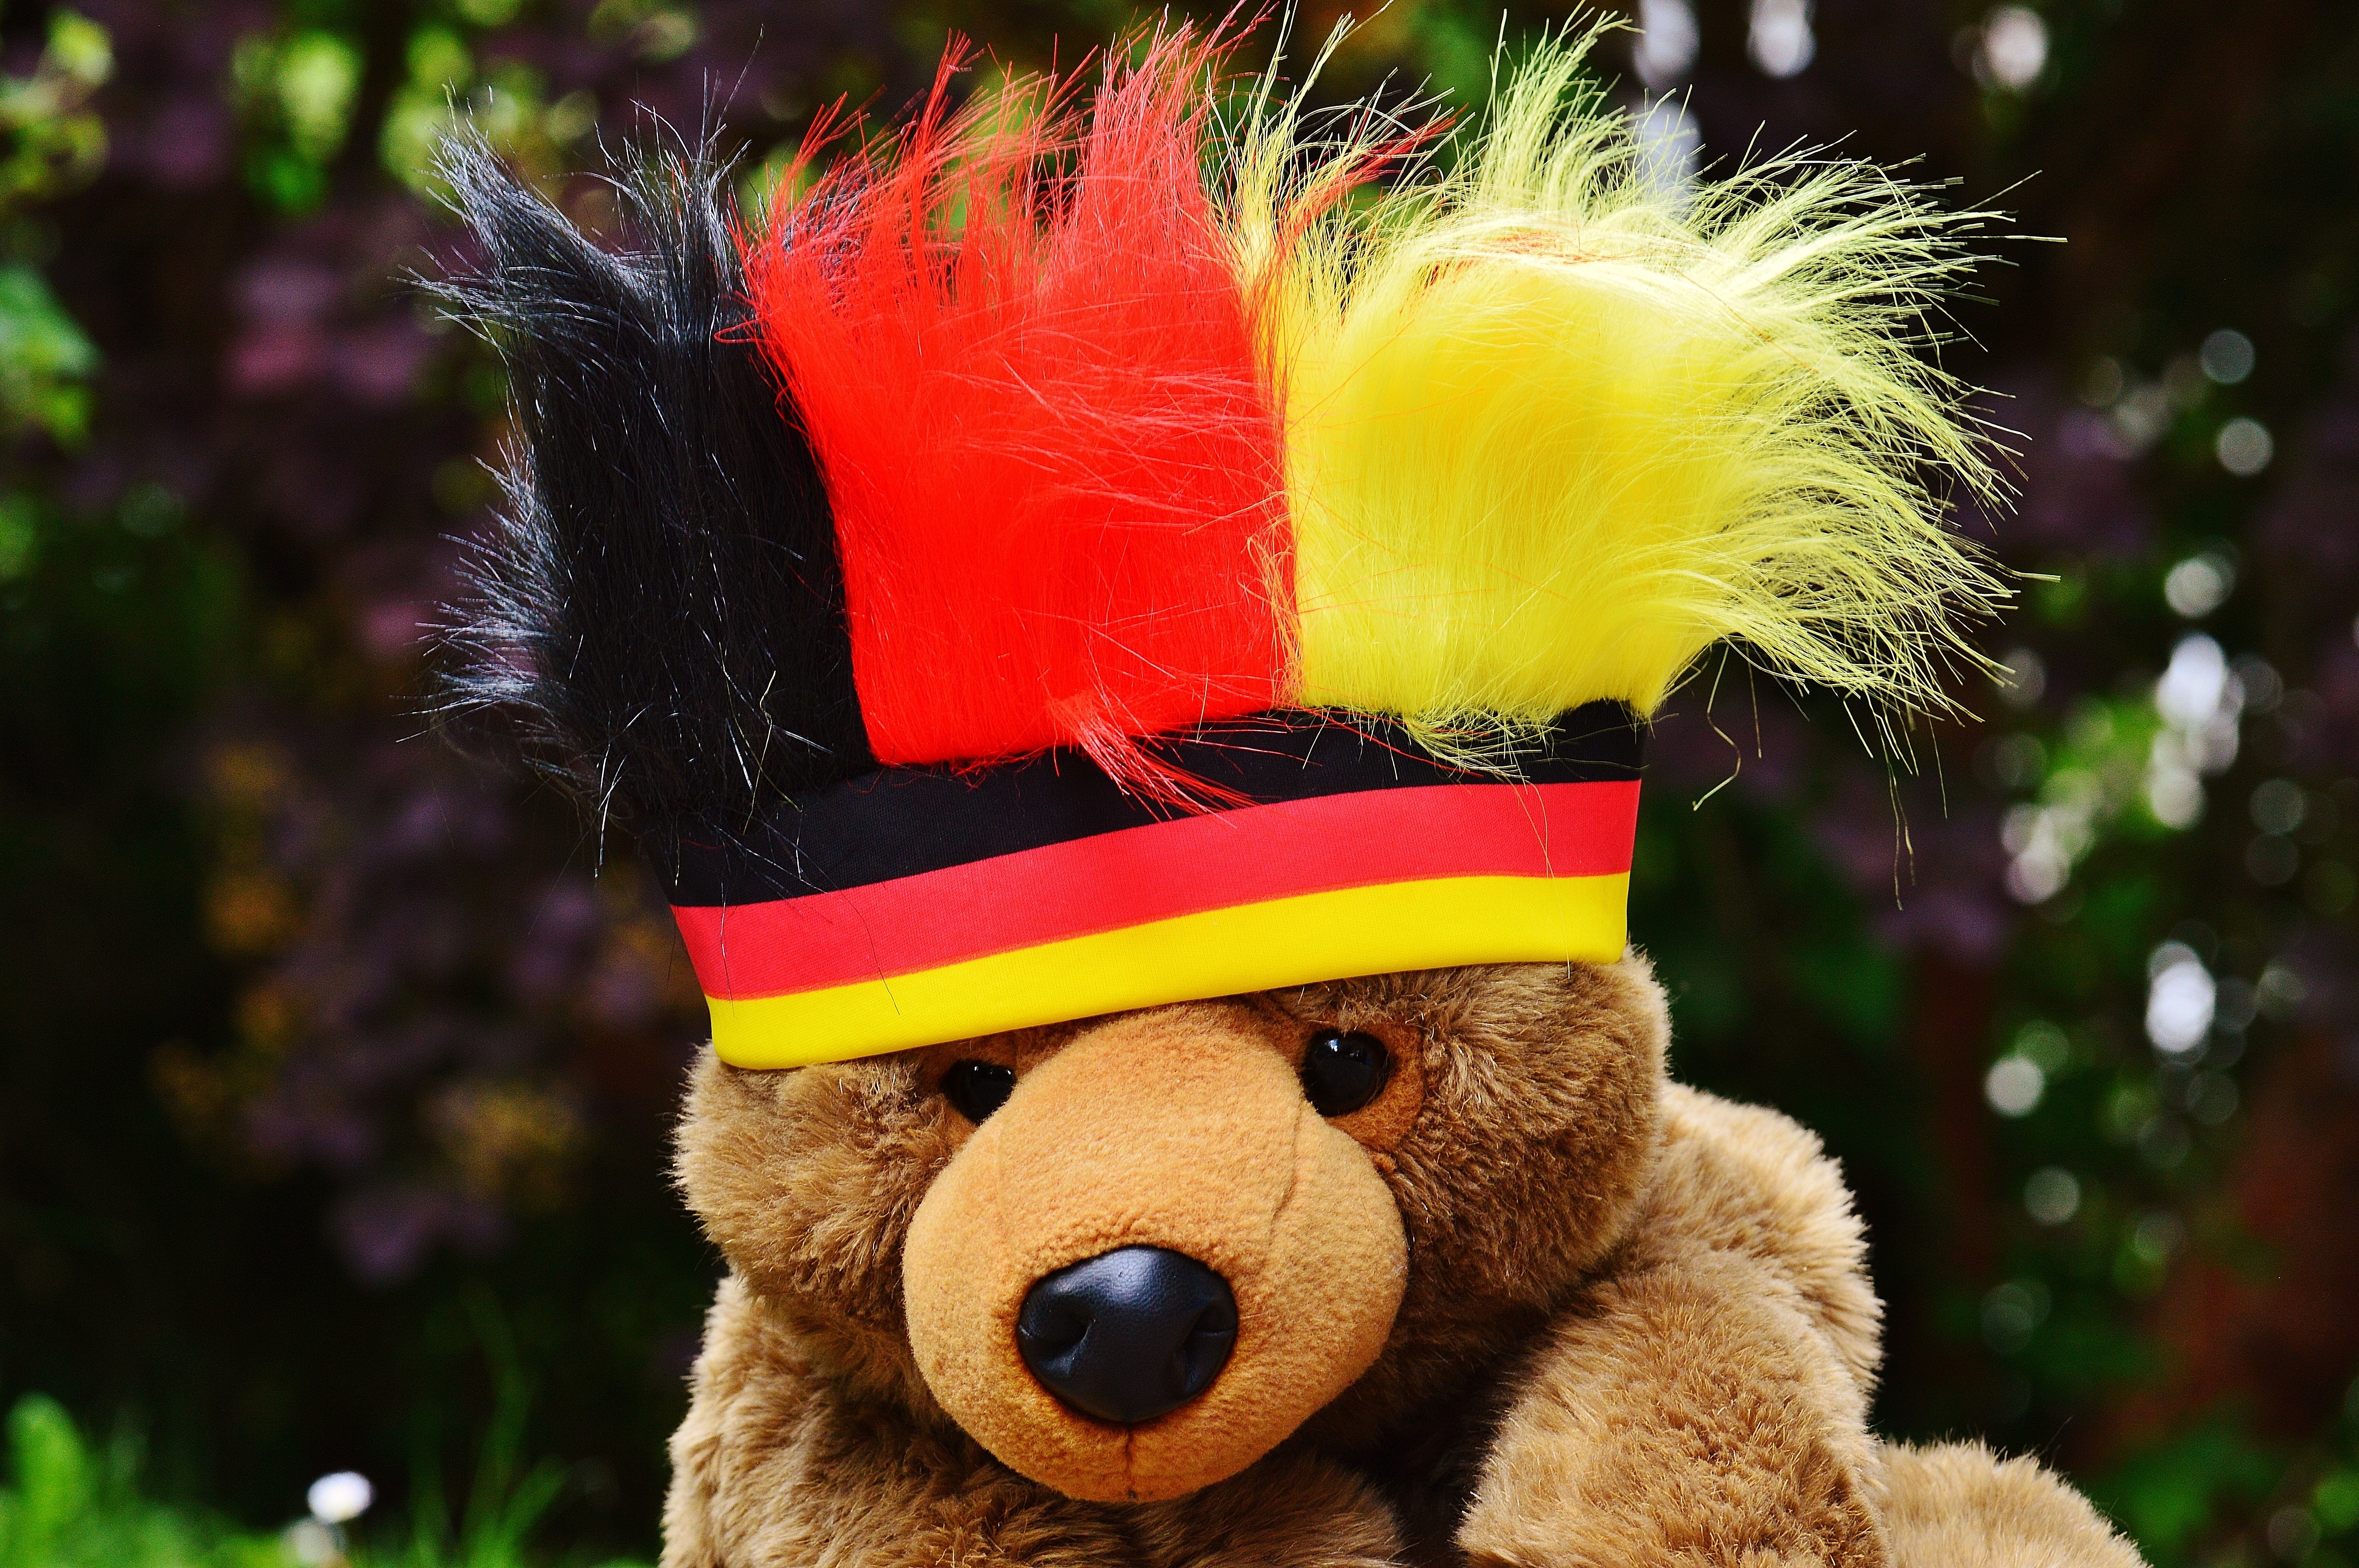 brown teddy bear wearing red and yellow headdress